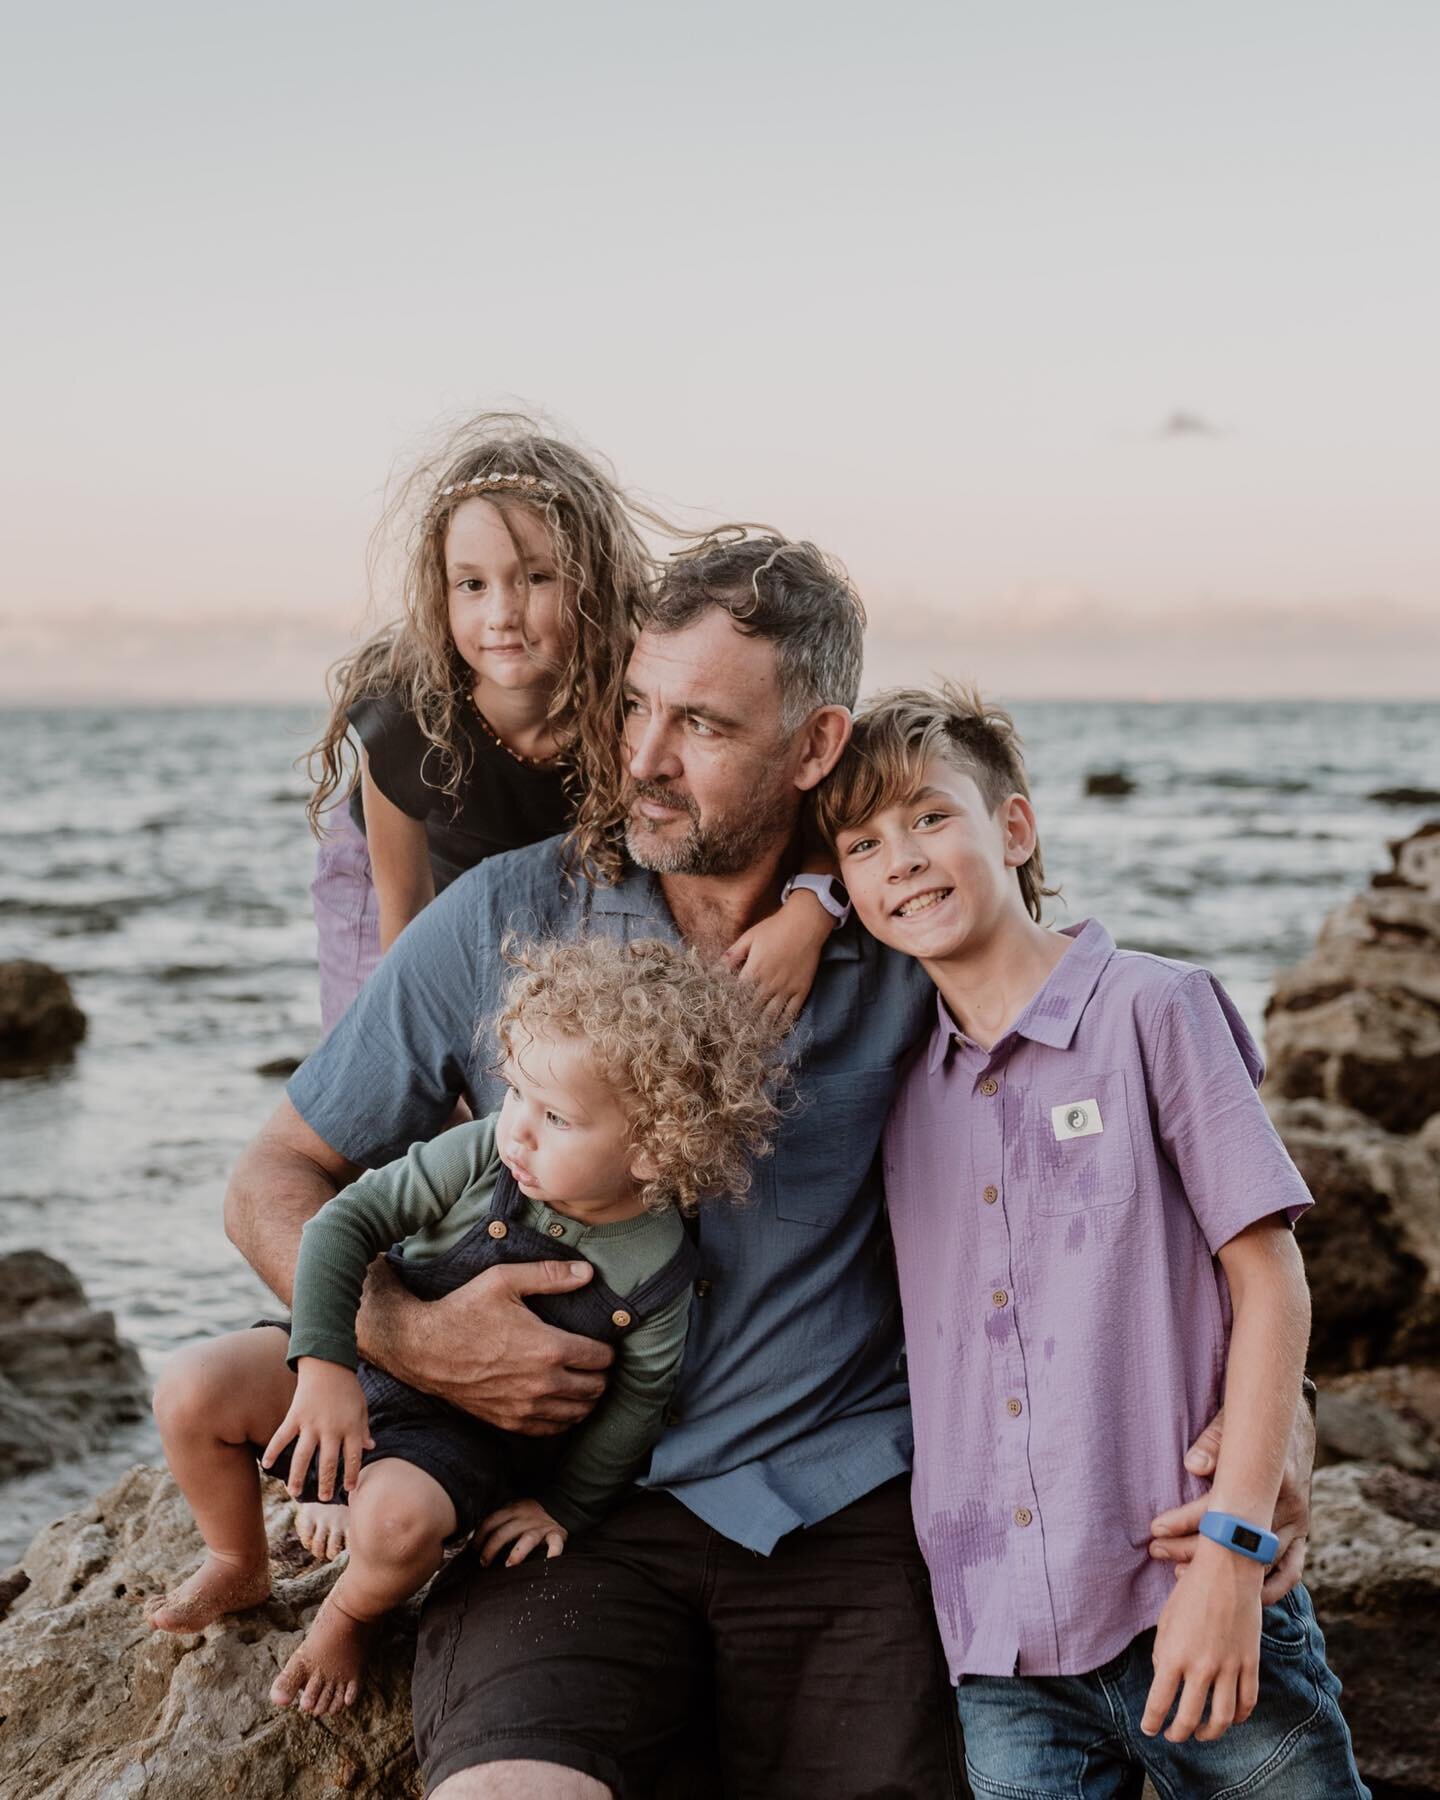 Our children are magic. Looking into their faces is like seeing the last, present and future all wrapped up in a person we love. 

Captured a small piece of this family&rsquo;s story amongst the sea and sky. 

Autumn in Queensland has been delivering